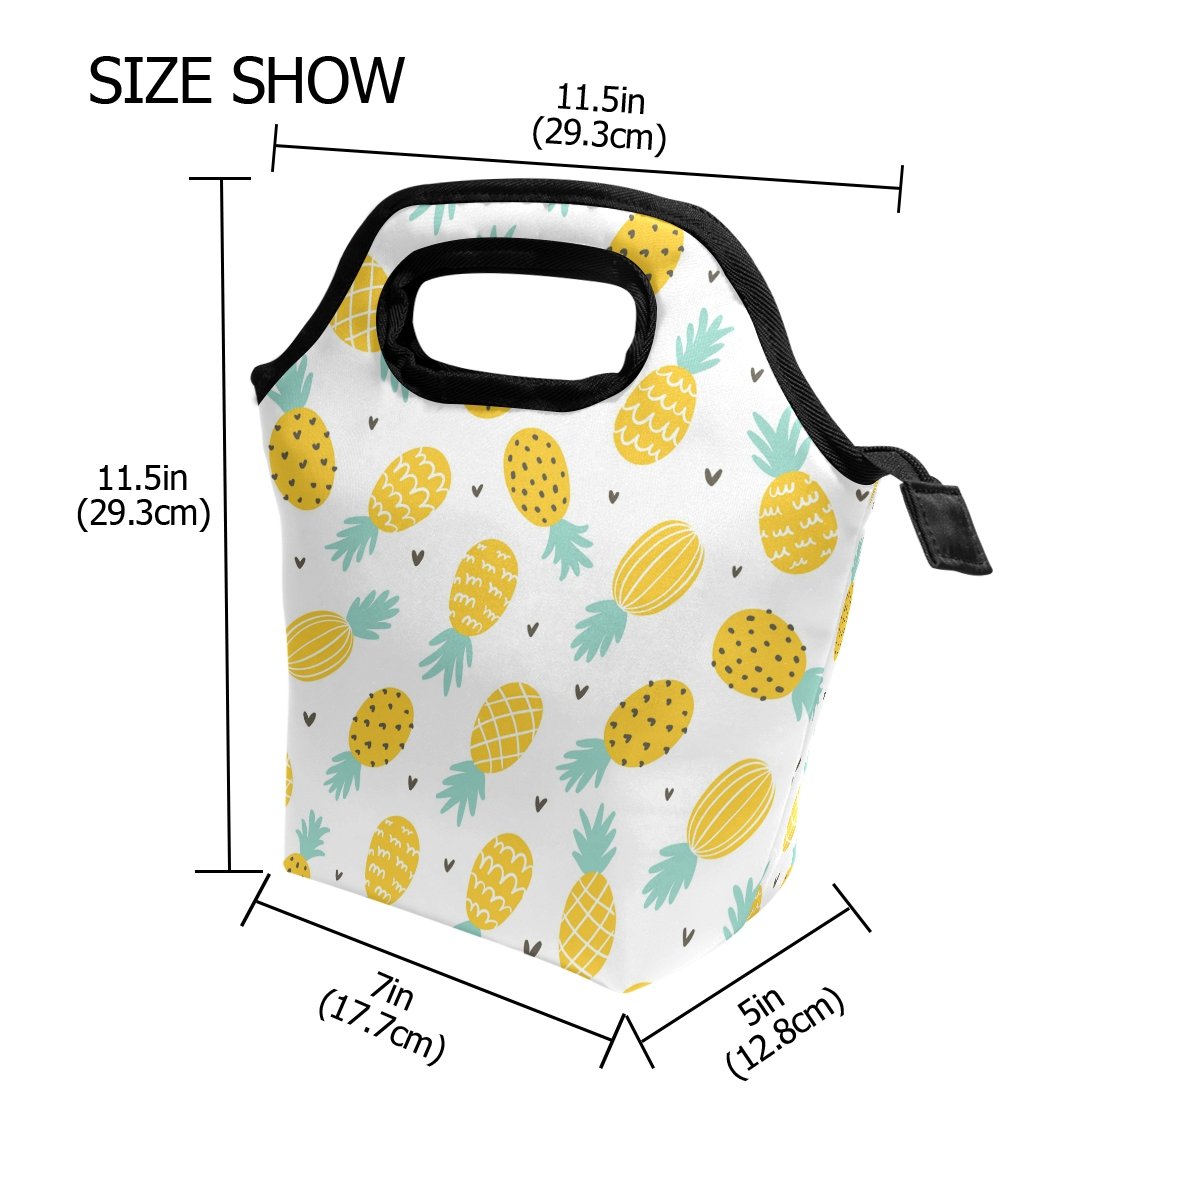 Neoprene Lunch Bag Pineapple And Hearts Printed Tote Reusable Insulated Waterproof School Picnic Carrying Gourmet Lunchbox Container Organizer For Men, Women, Adults, Kids, Girls, Boys